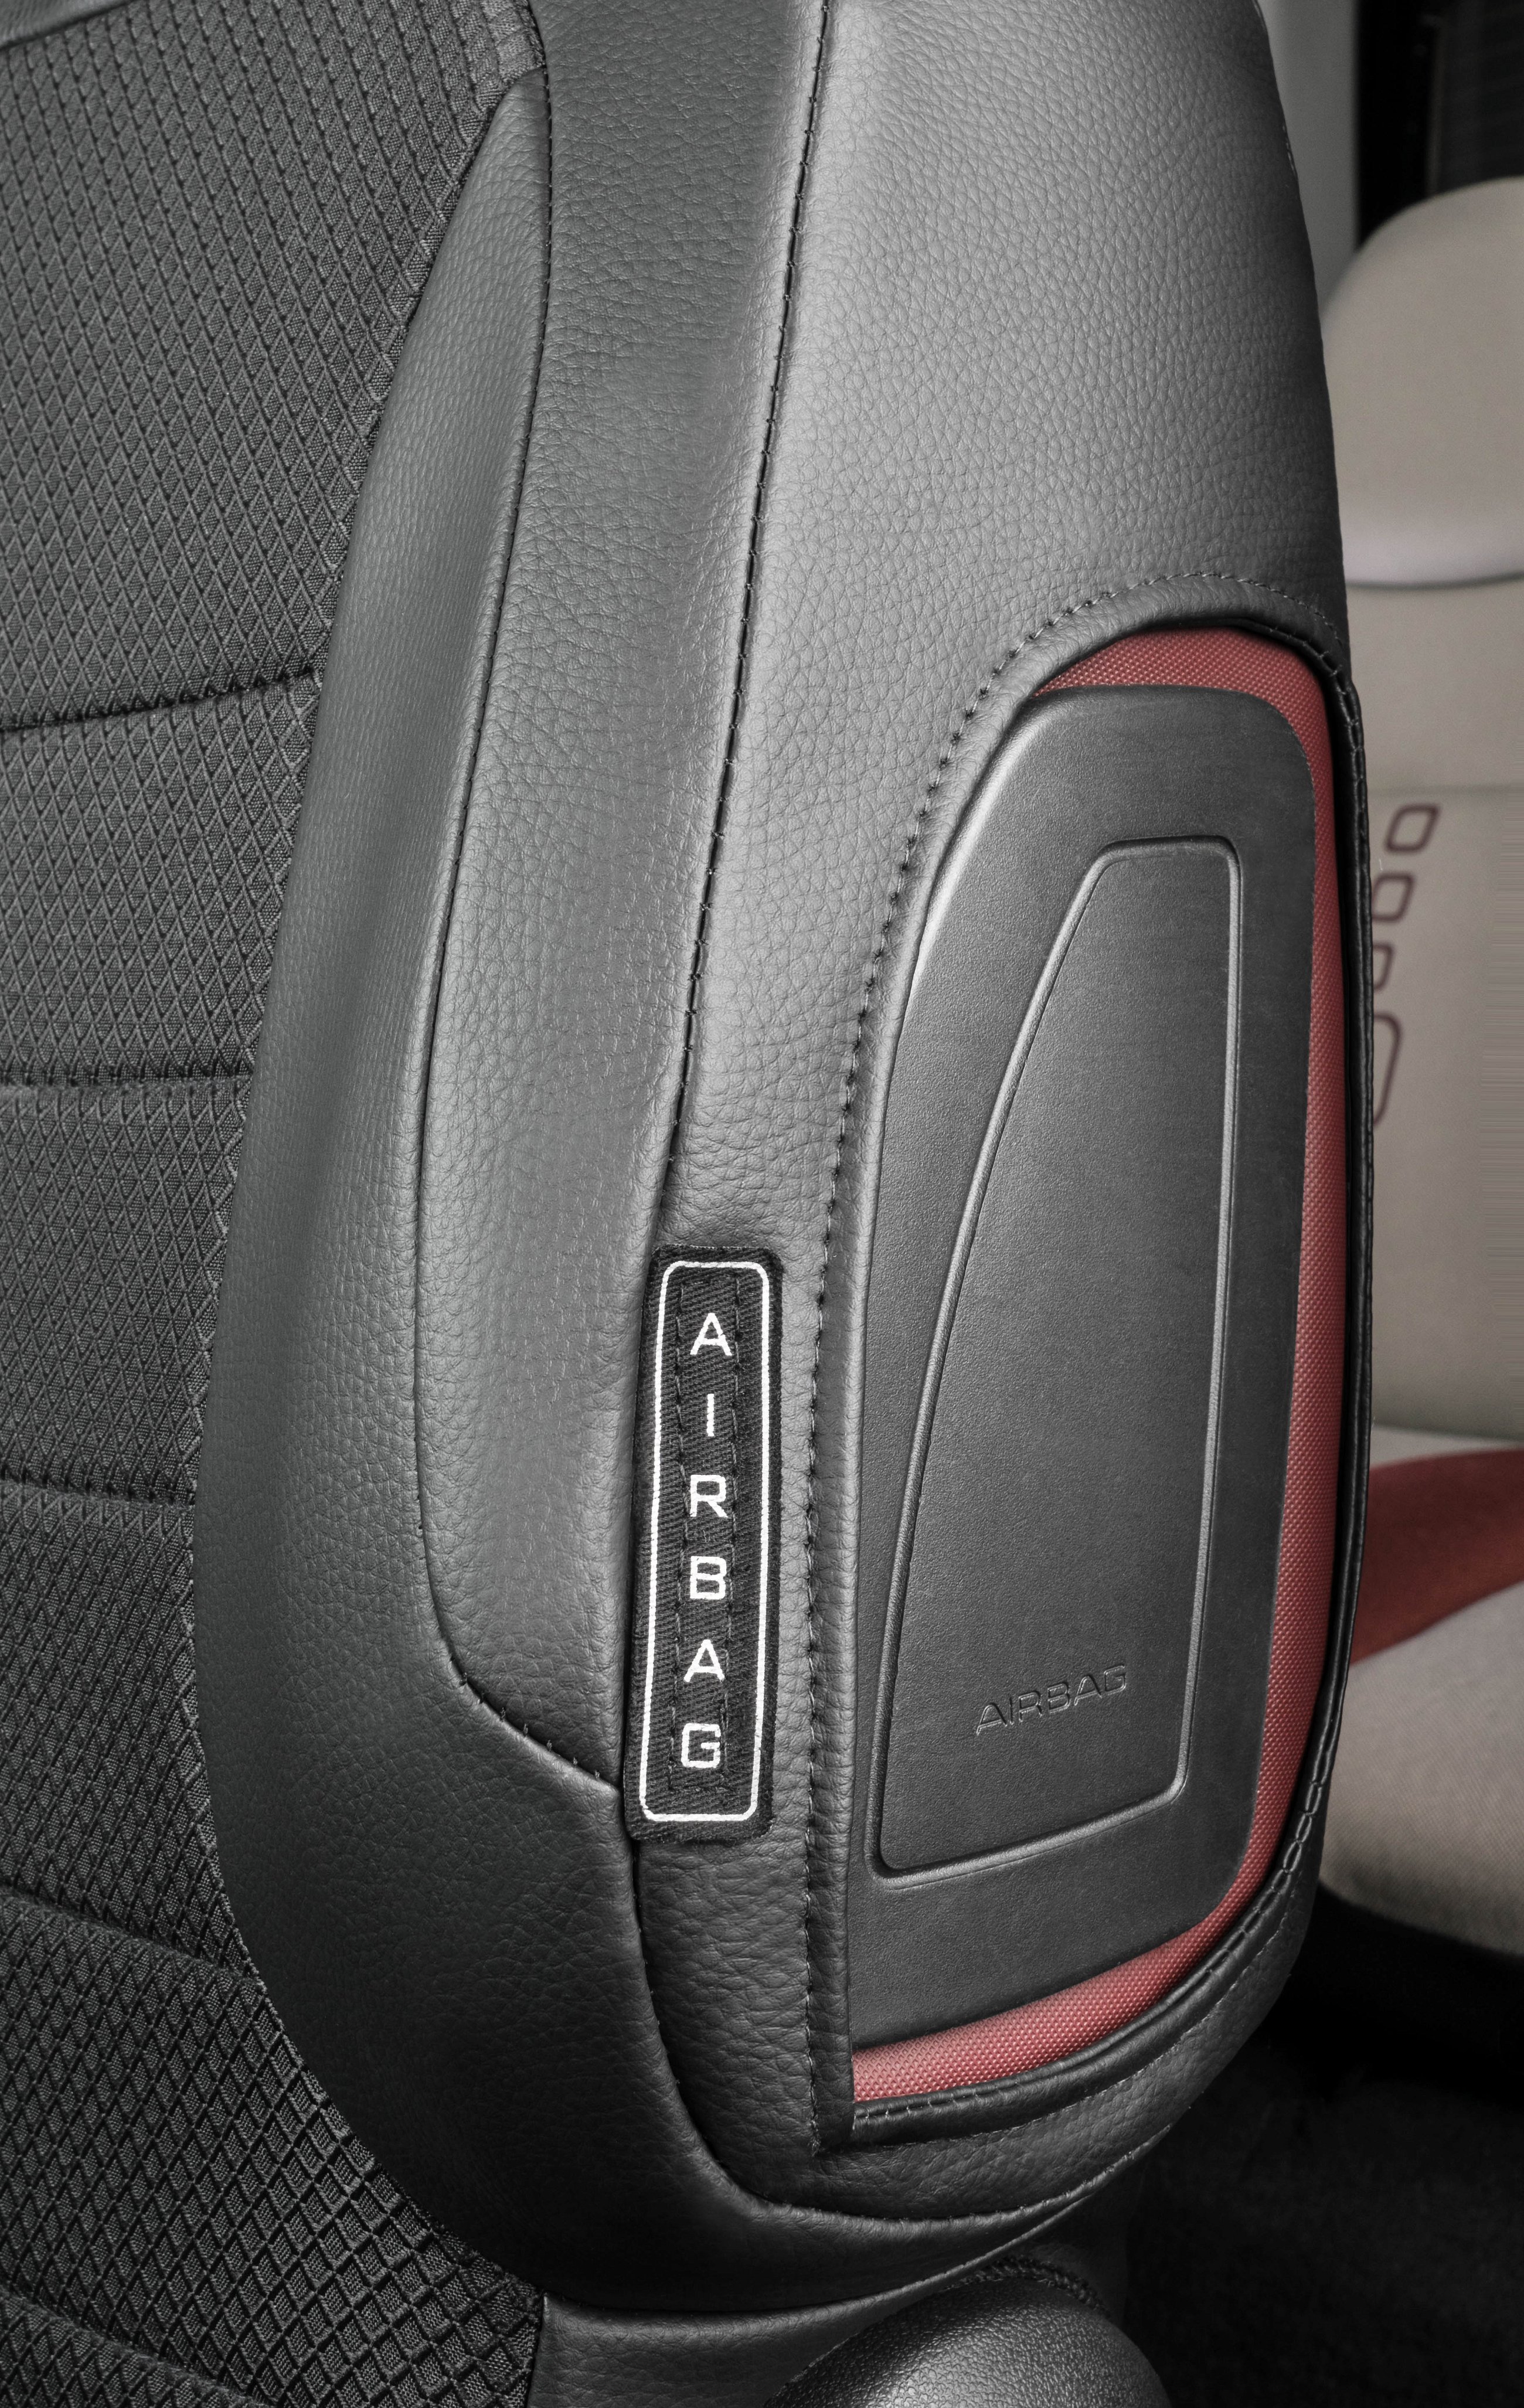 Premium Seat Cover for Citroen Berlingo 2 2009-Today, 2 single seat covers front